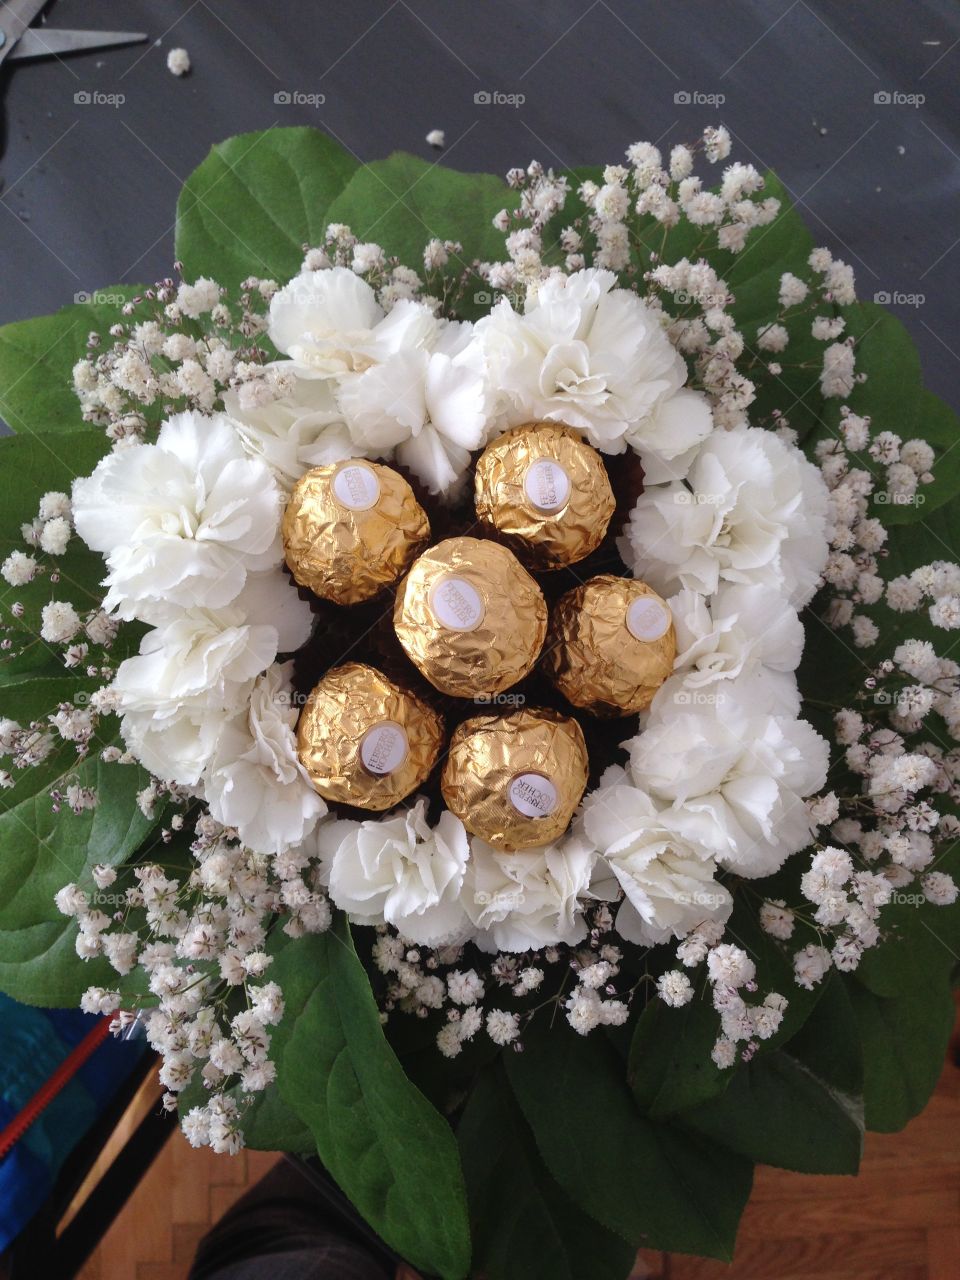 sweets, luxury and flowers. #chocolate #gold #luxury 